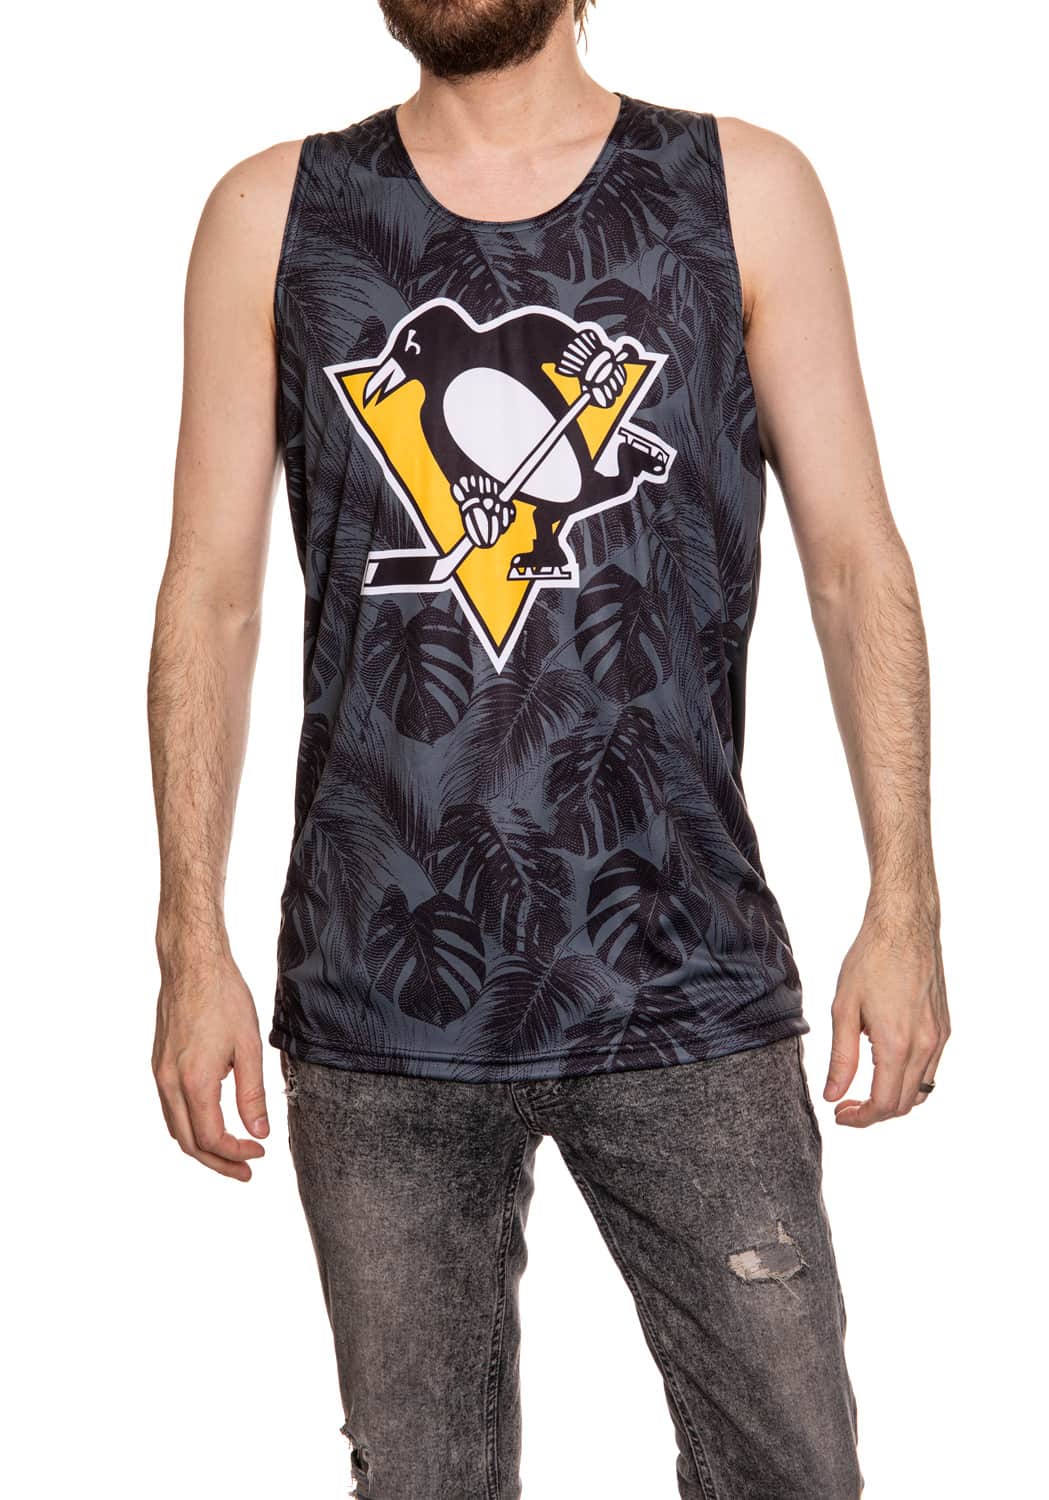 Pittsburgh Penguins "Palm" Tank Top